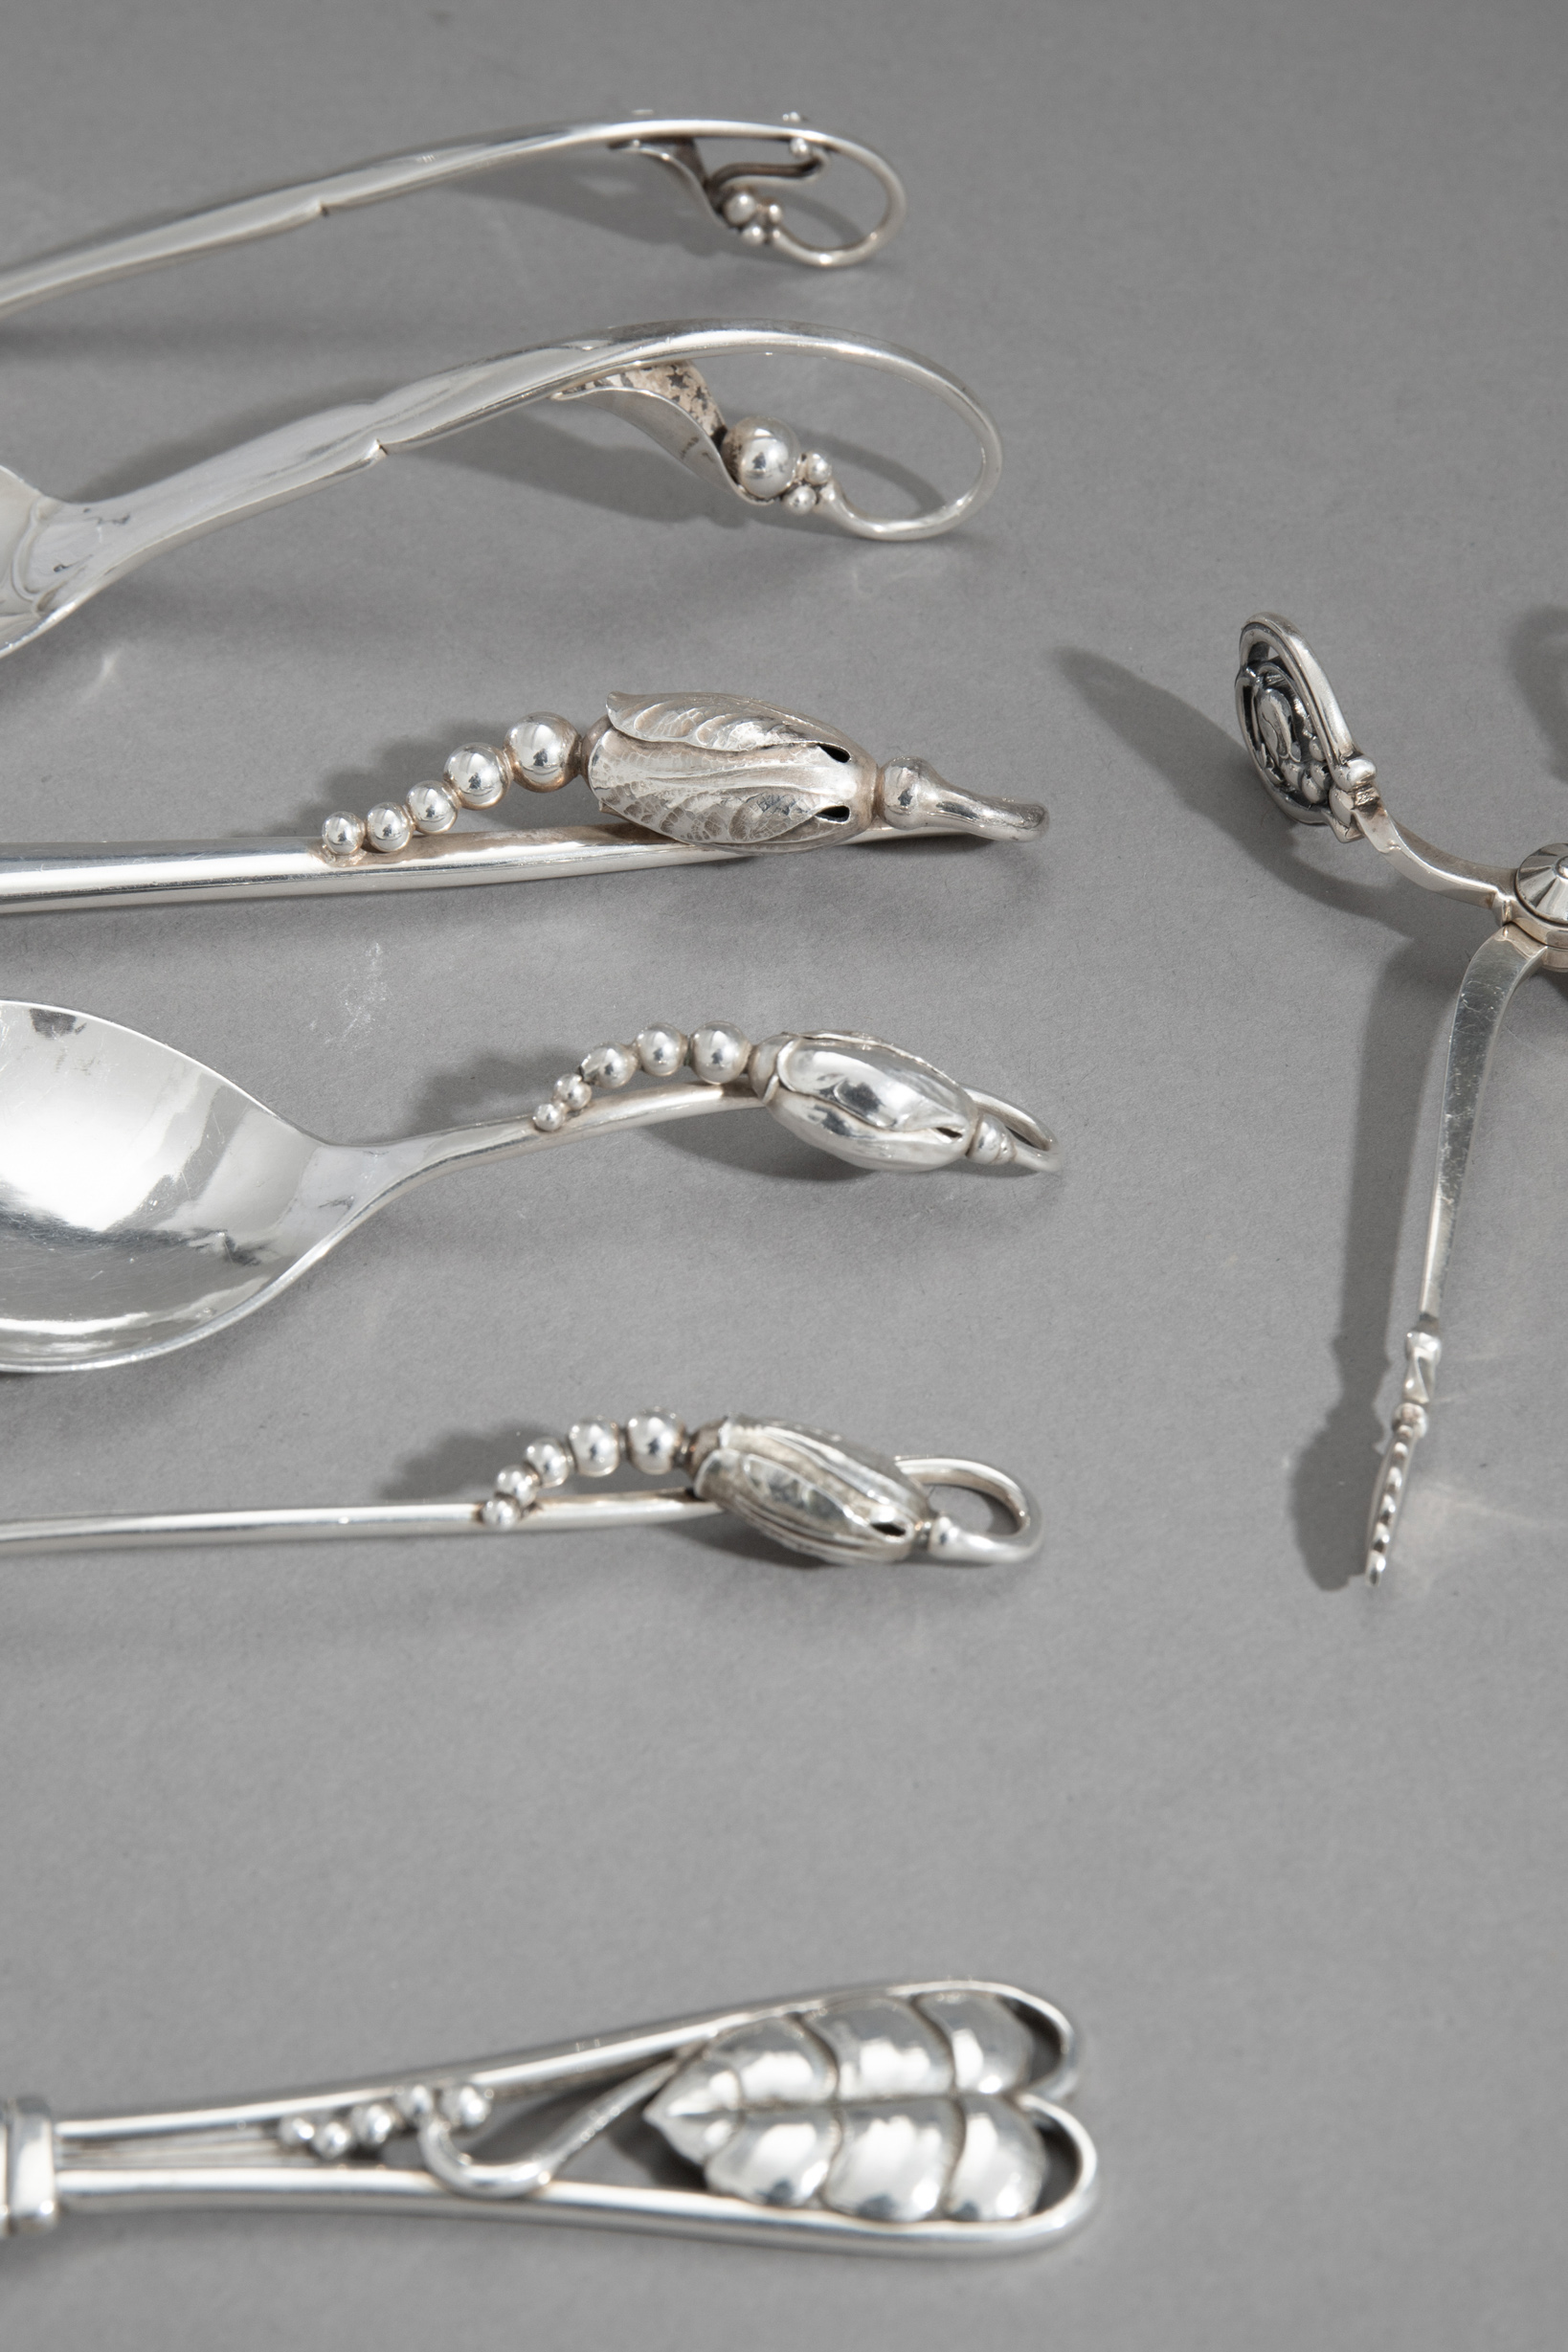 Set of silver Georg Jensen, 7 parts Magnolia/ Blossom and others - Image 2 of 5